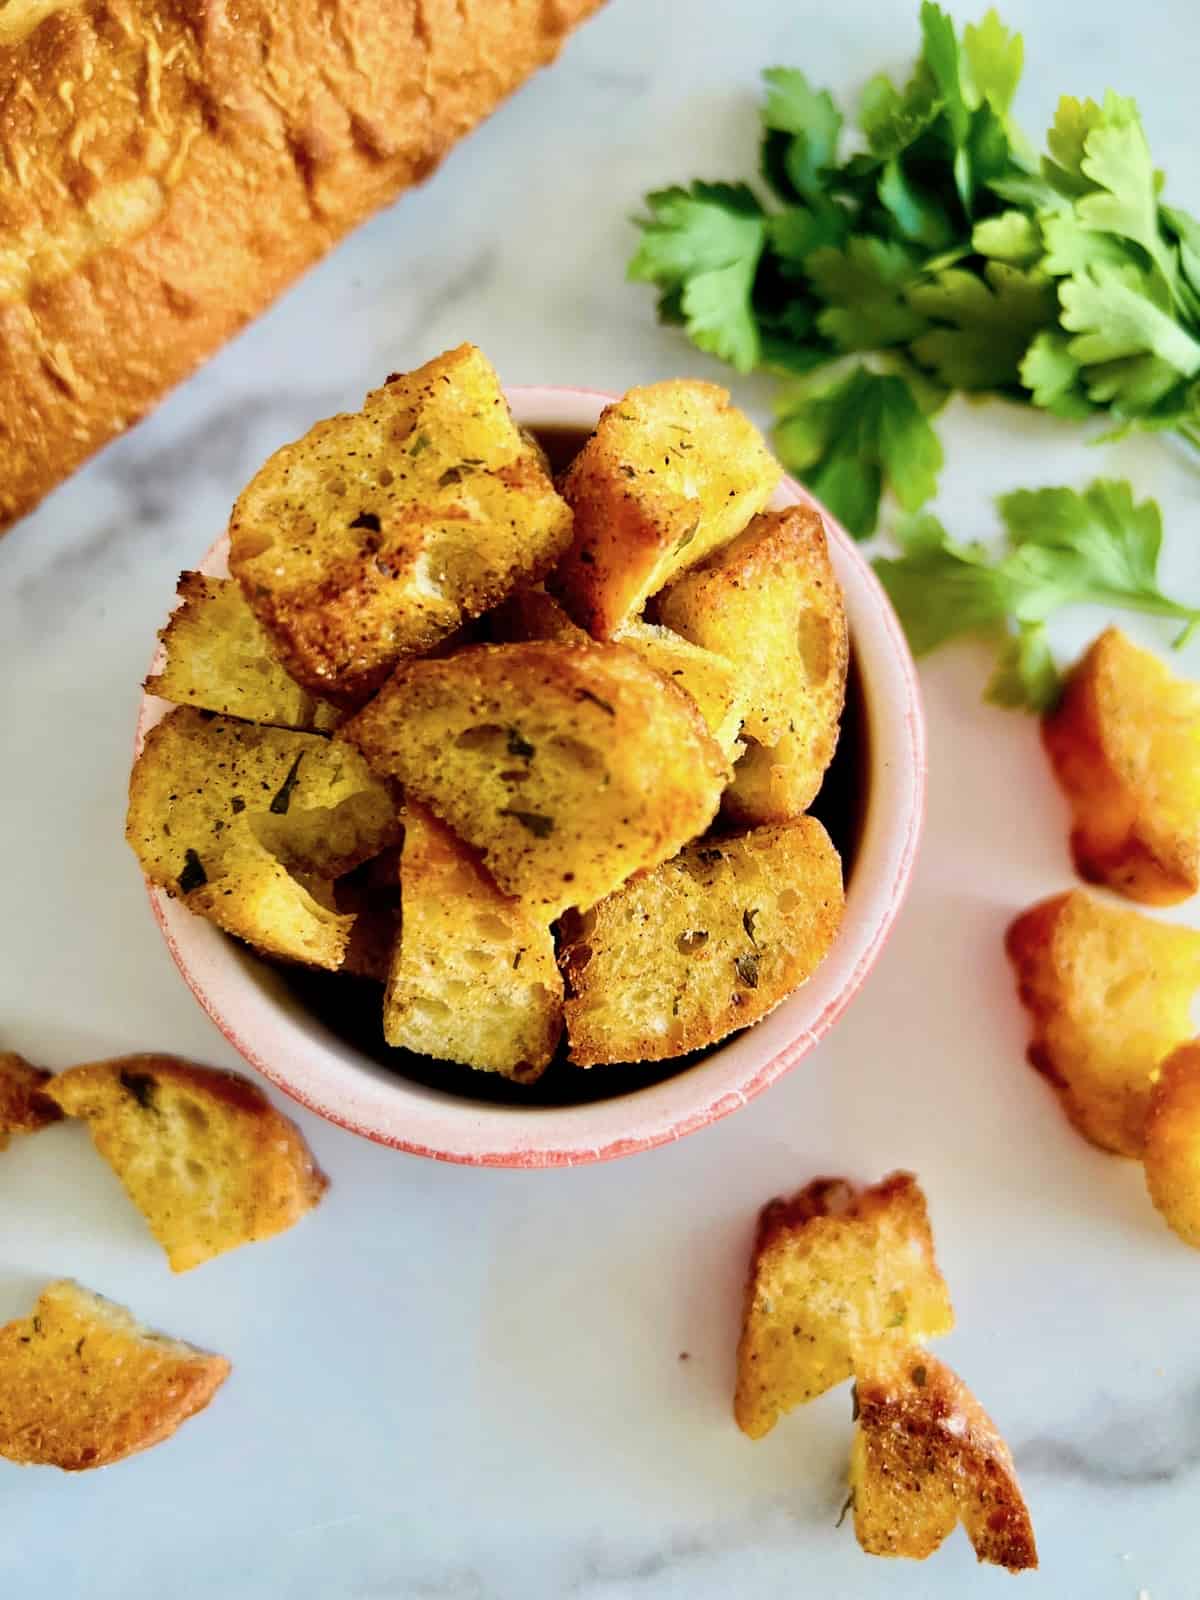  Overhead image of air fryer croutons freshly toated in a bowl with a baguette croutons, and parsley on the table.